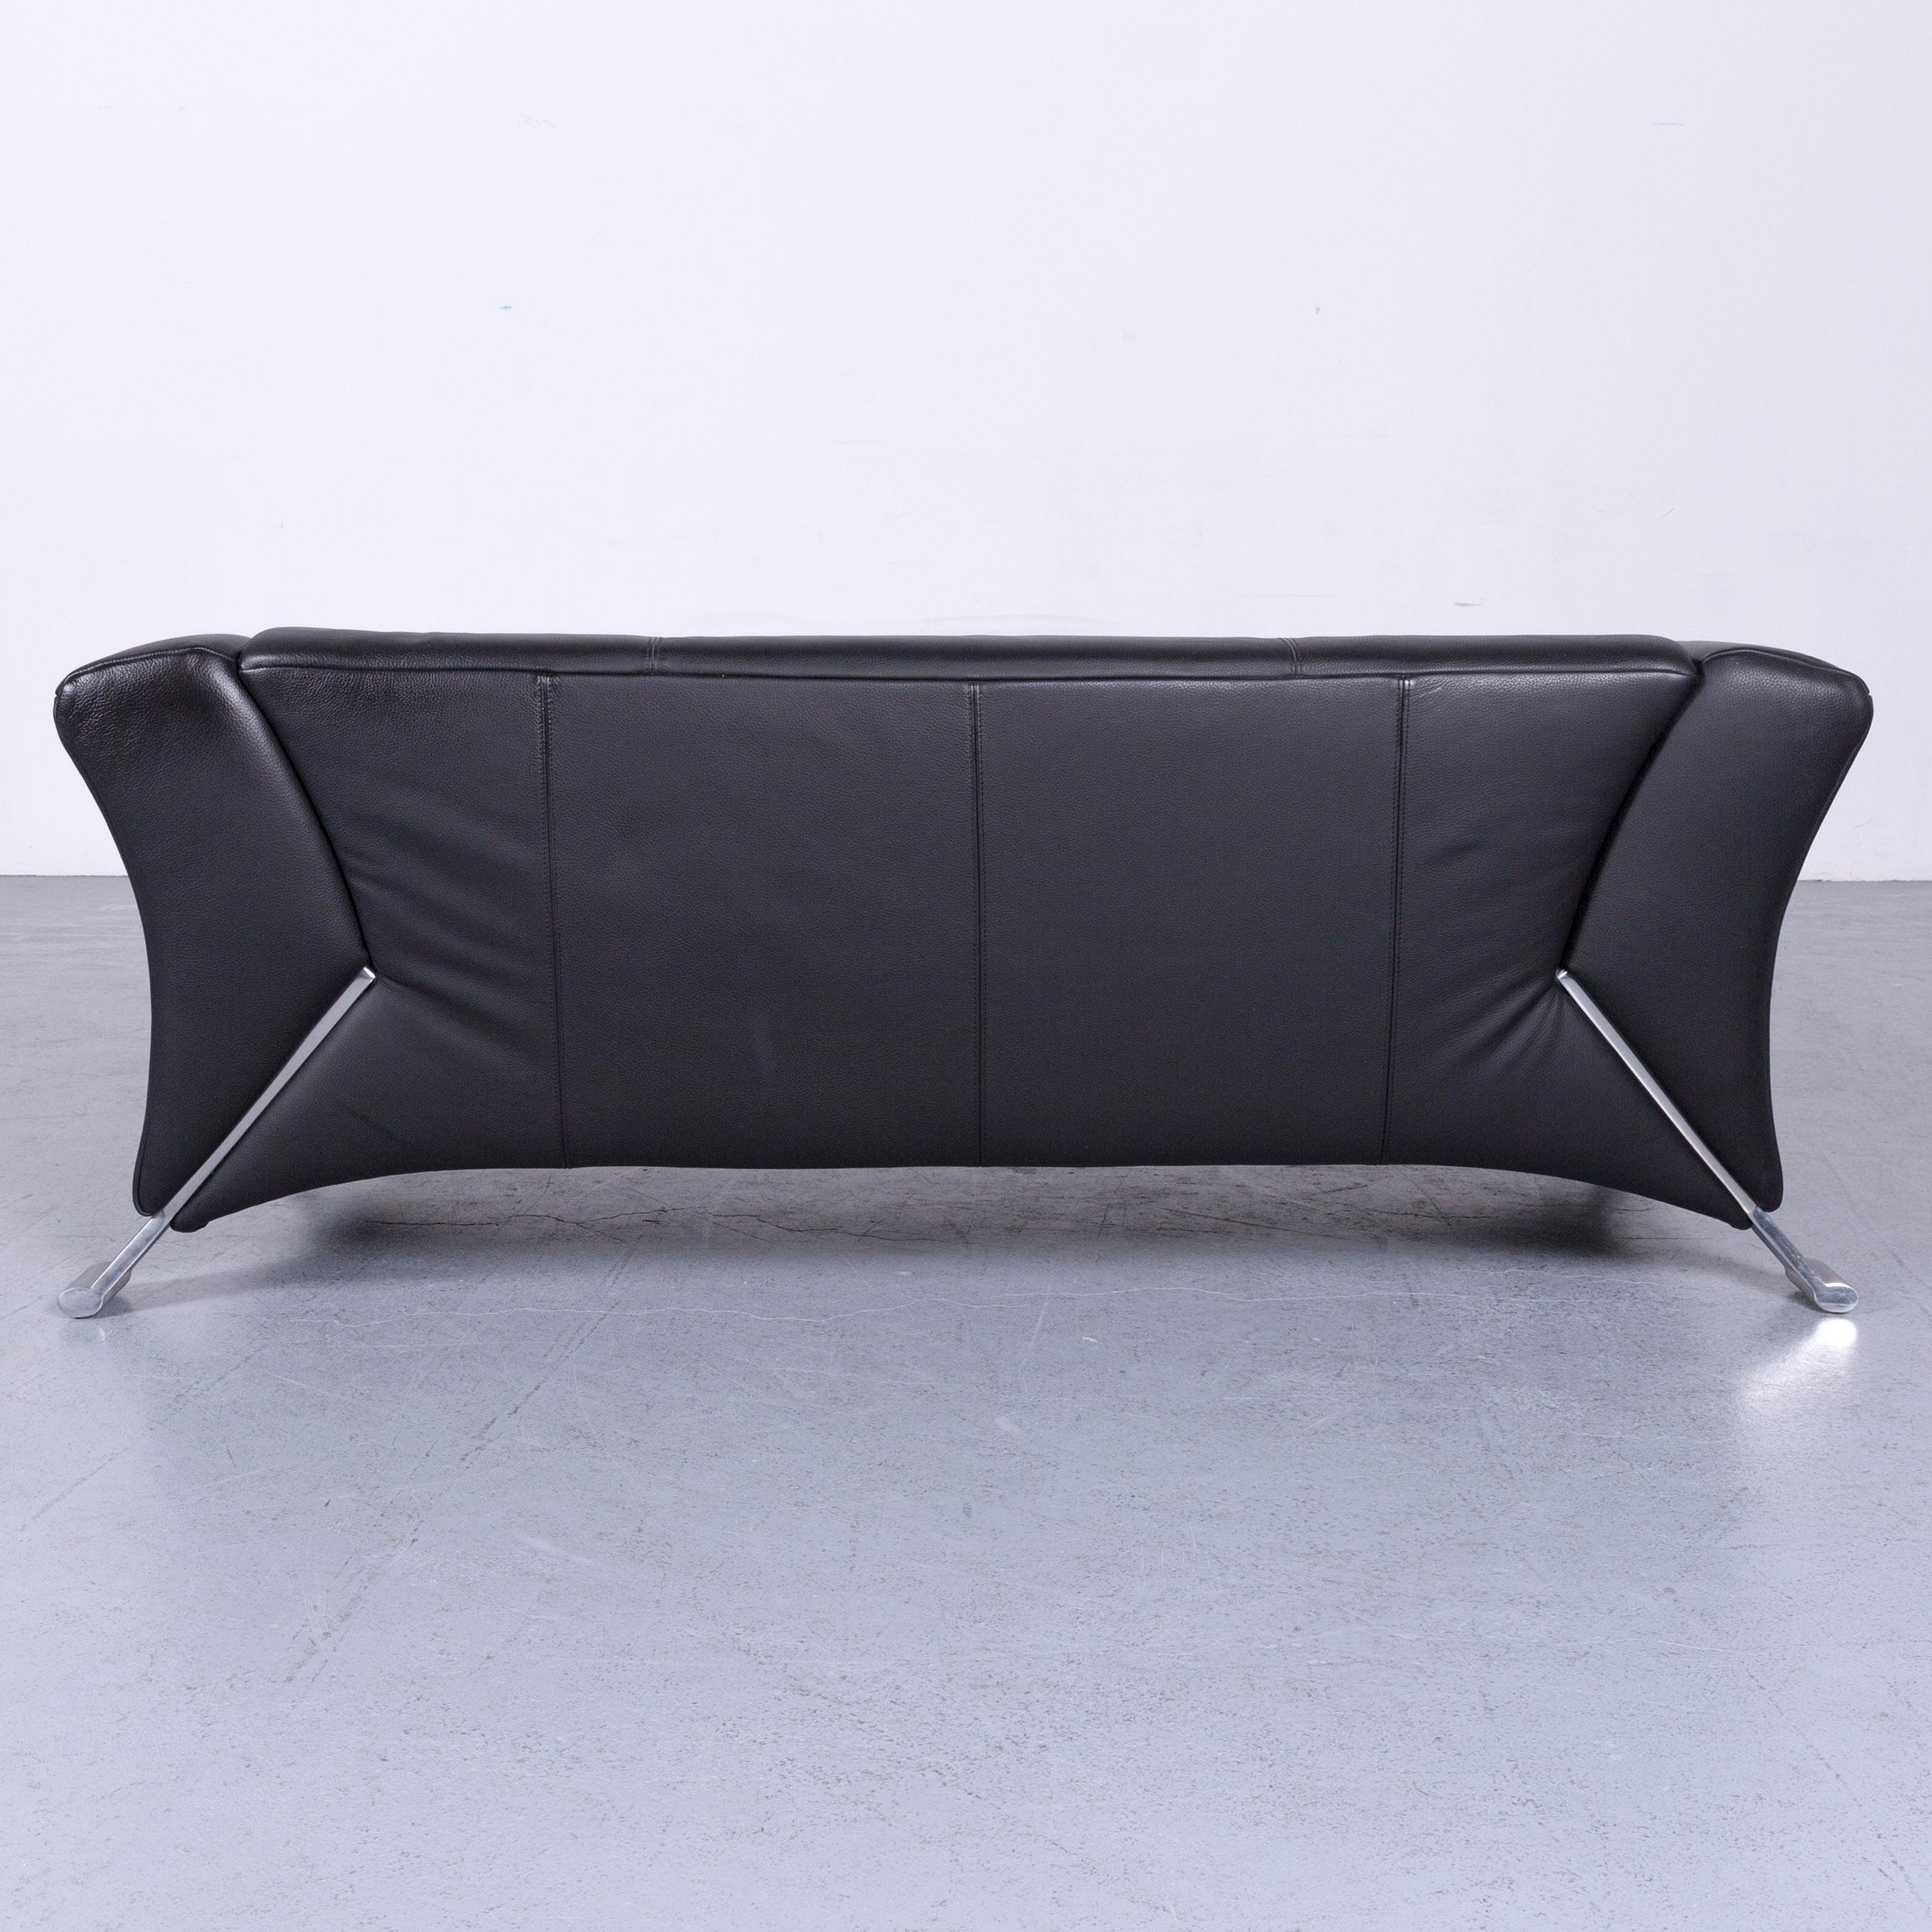 Rolf Benz 322 Designer Sofa Black Two-Seat Leather Couch 3